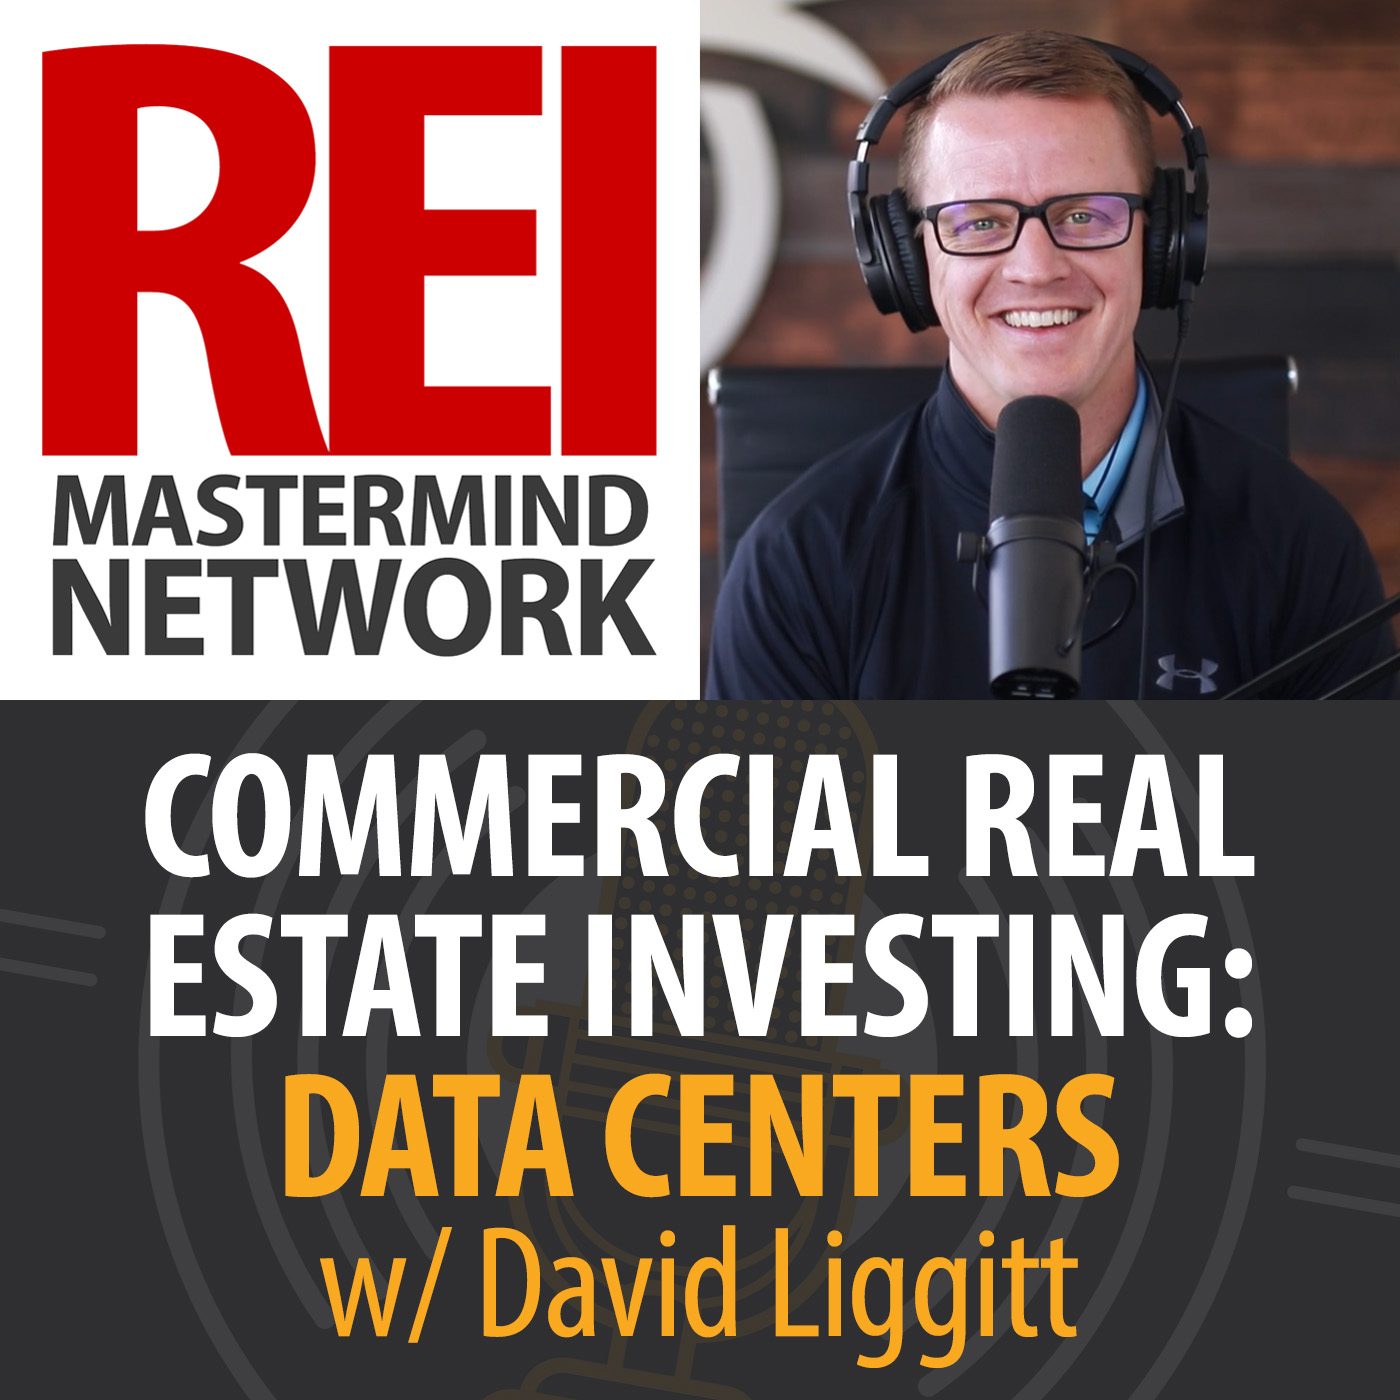 Commercial Real Estate Investing: Data Centers with David Liggitt Image